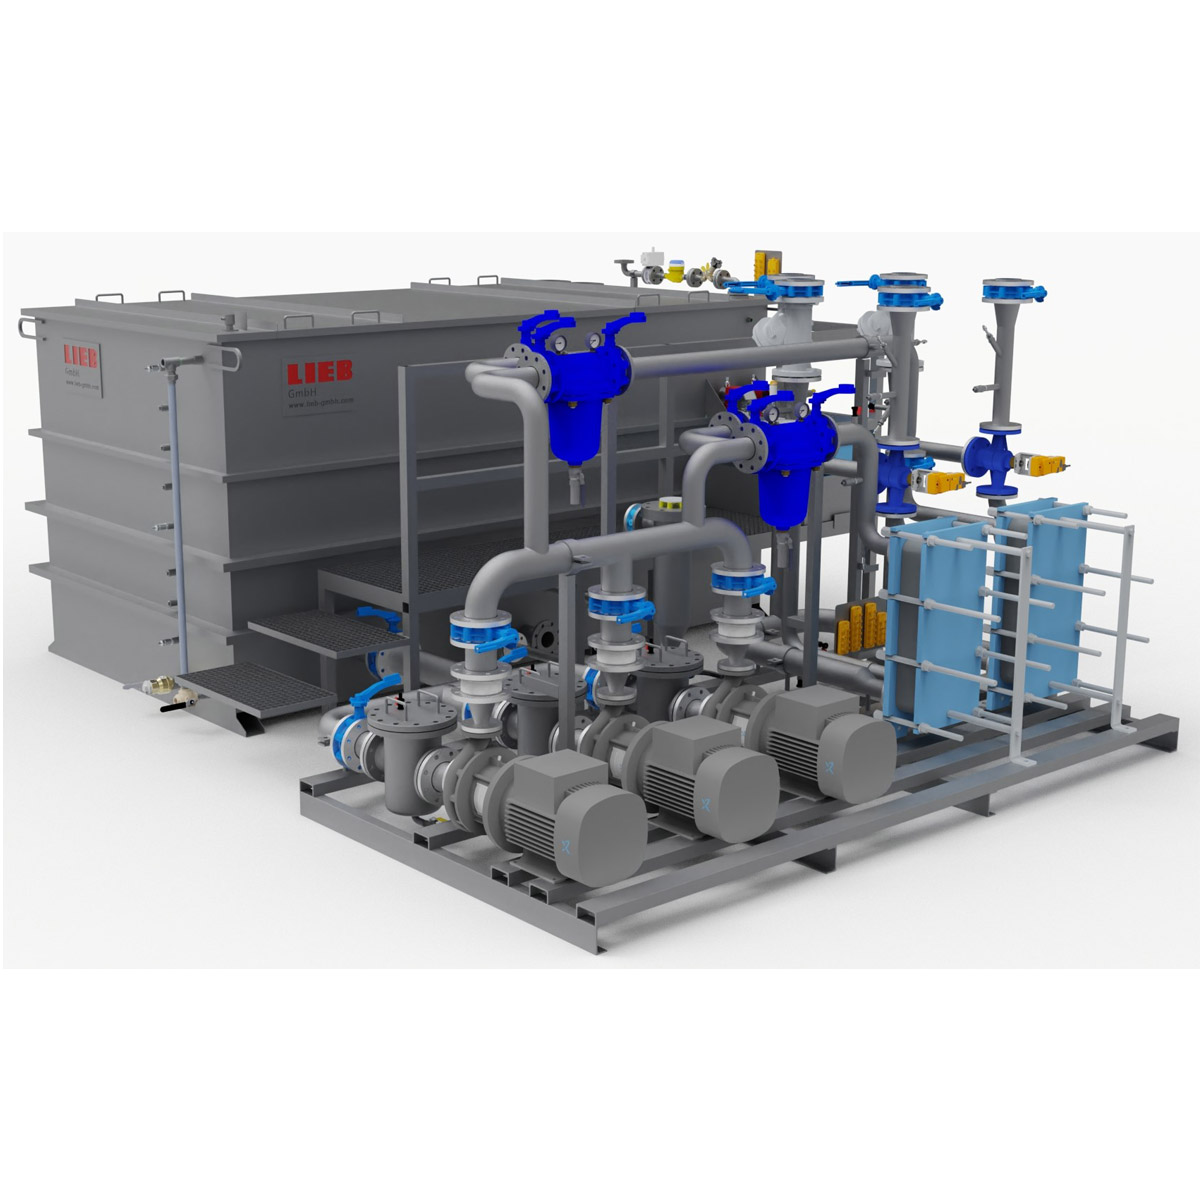 Process- cooling water systems for casting machines (volume flow: 80 m³/h)